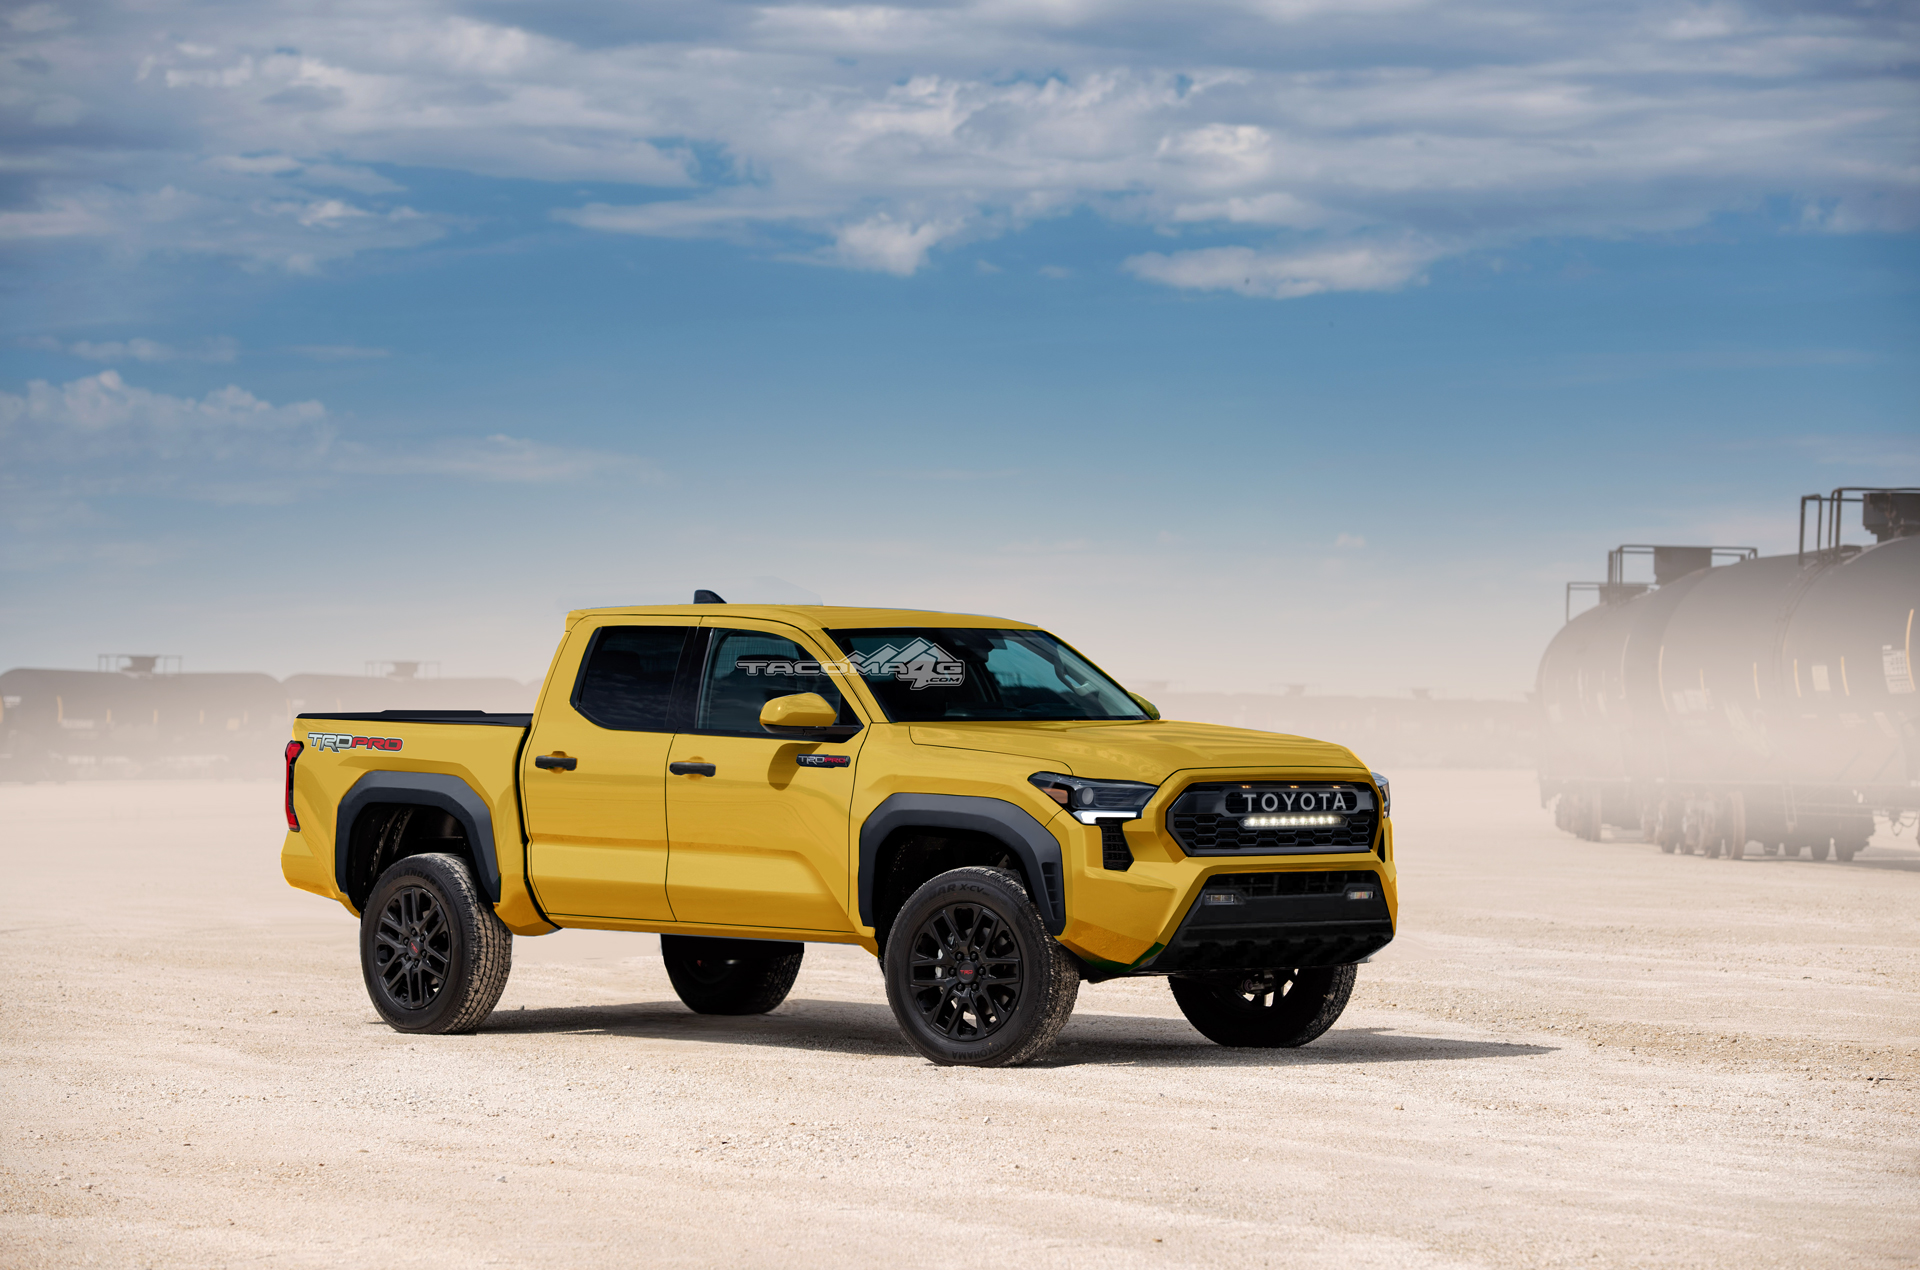 2024 Tacoma Our 2024 Toyota Tacoma TRD PRO Preview Renderings! Tacoma-2023-Front-Yellow